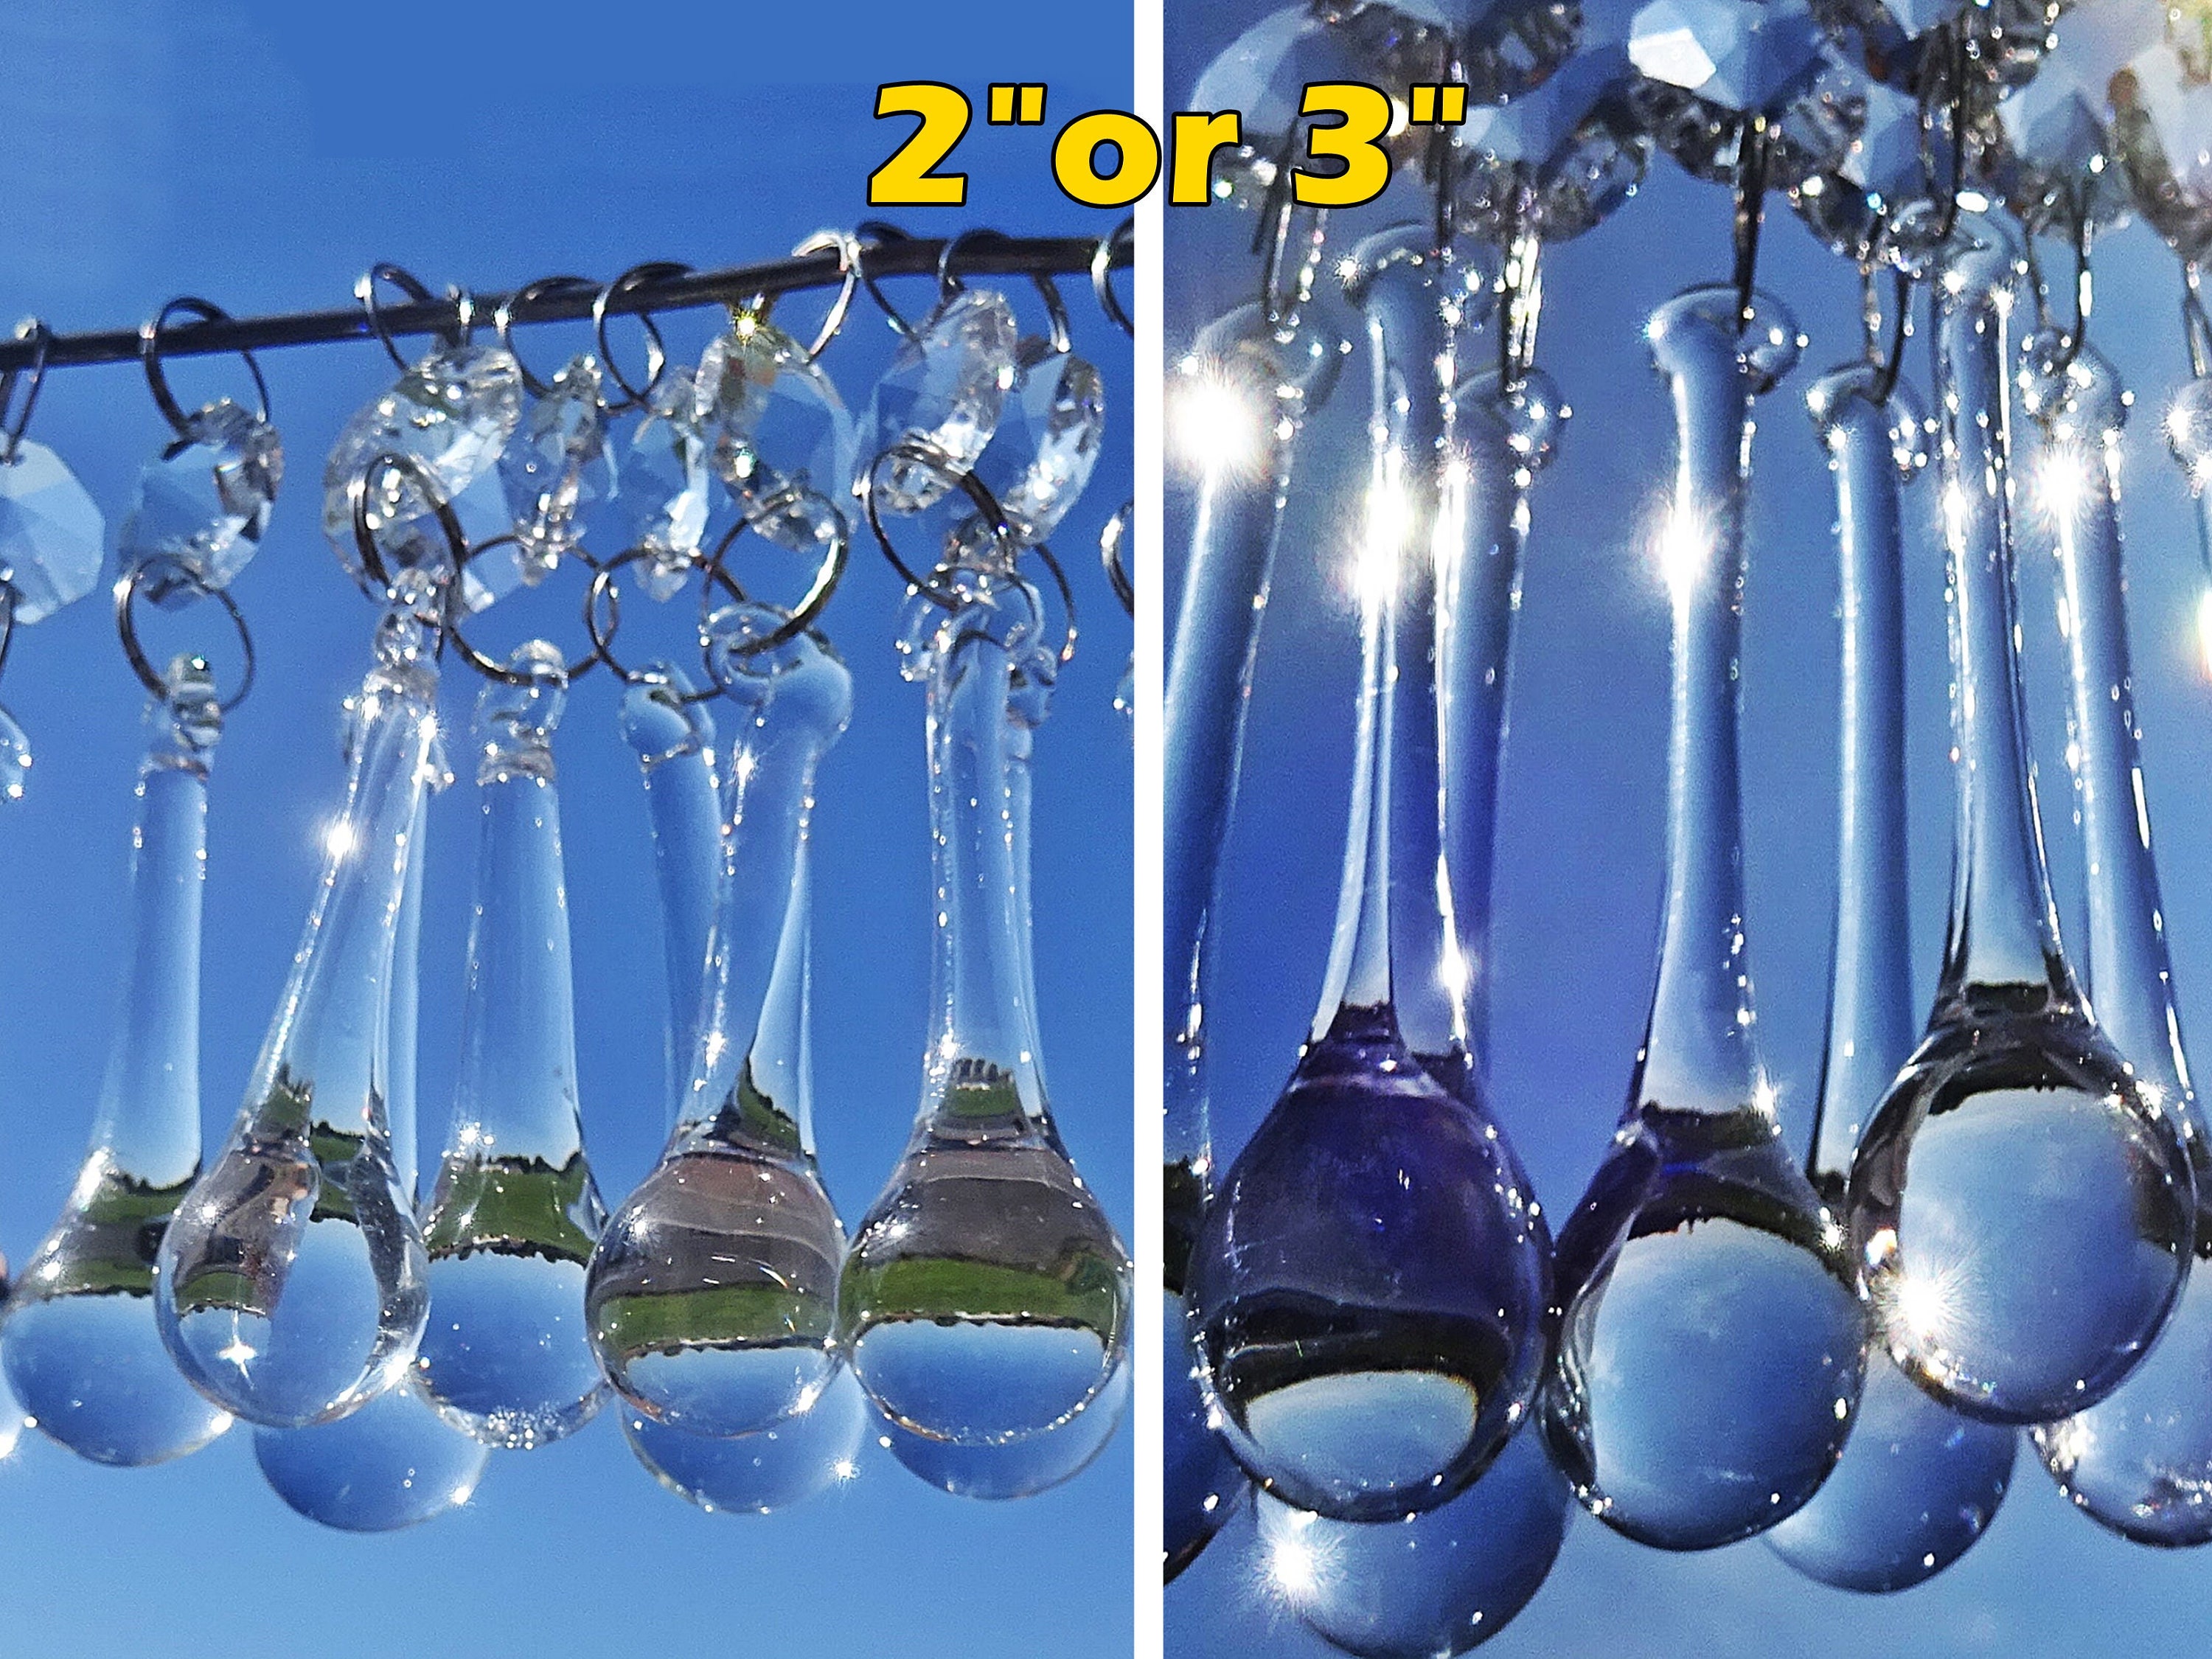 CRYSTALS BELL BEADS CHANDELIER GLASS AB DROPS 10 x 2" BEADS LIGHT PARTS DROPLETS 